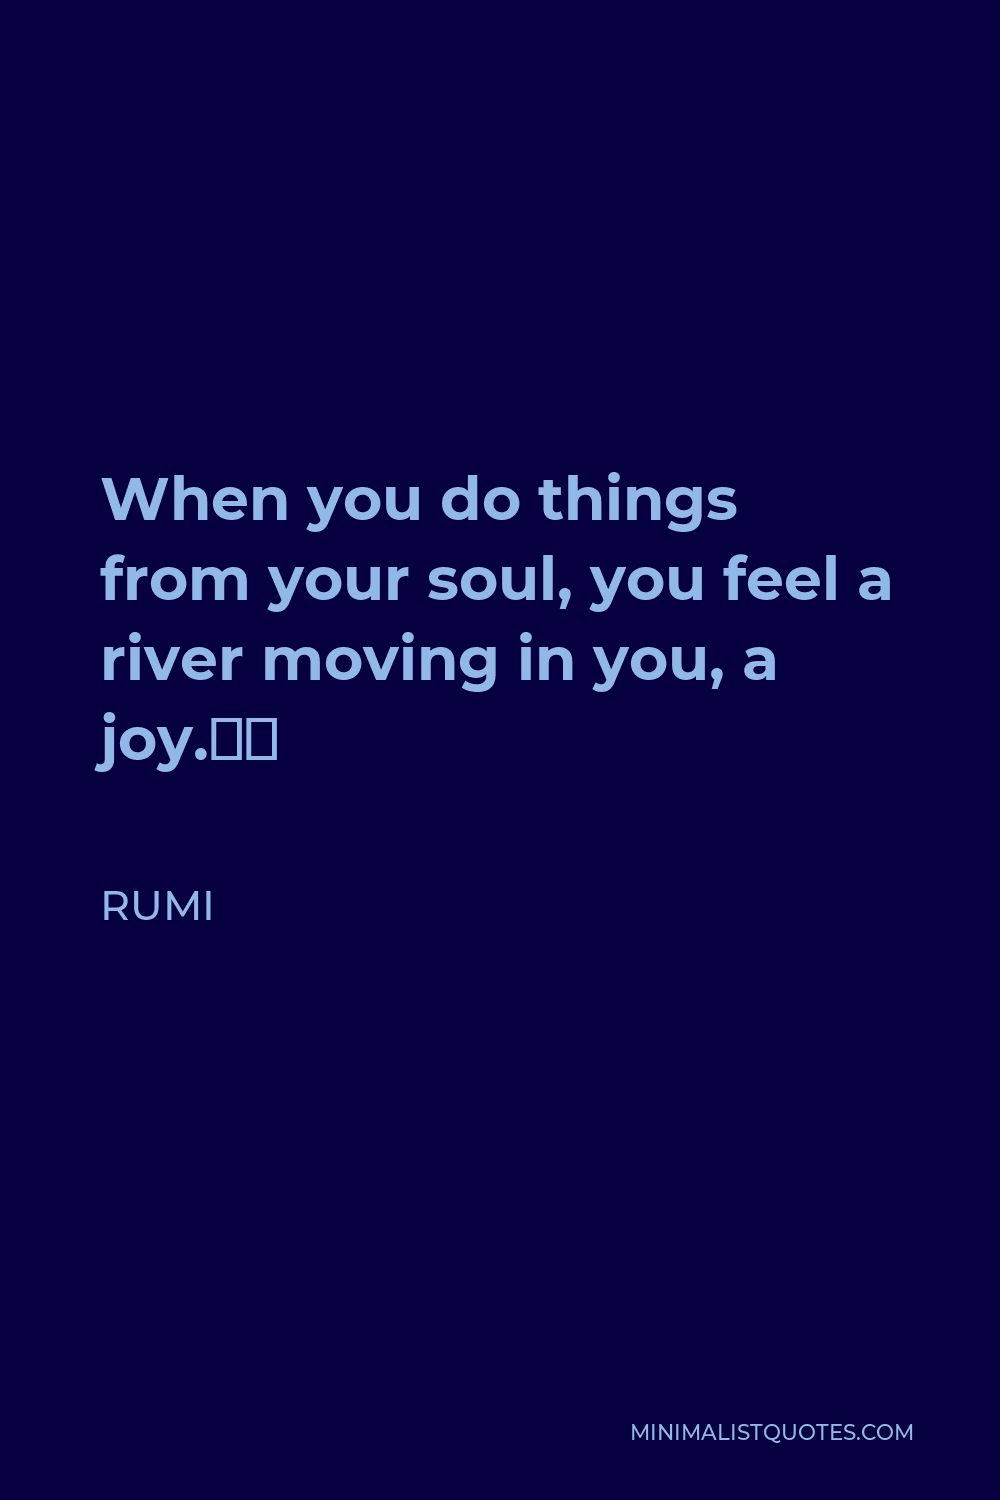 Rumi Quote - When you do things from your soul, you feel a river moving in you, a joy.”